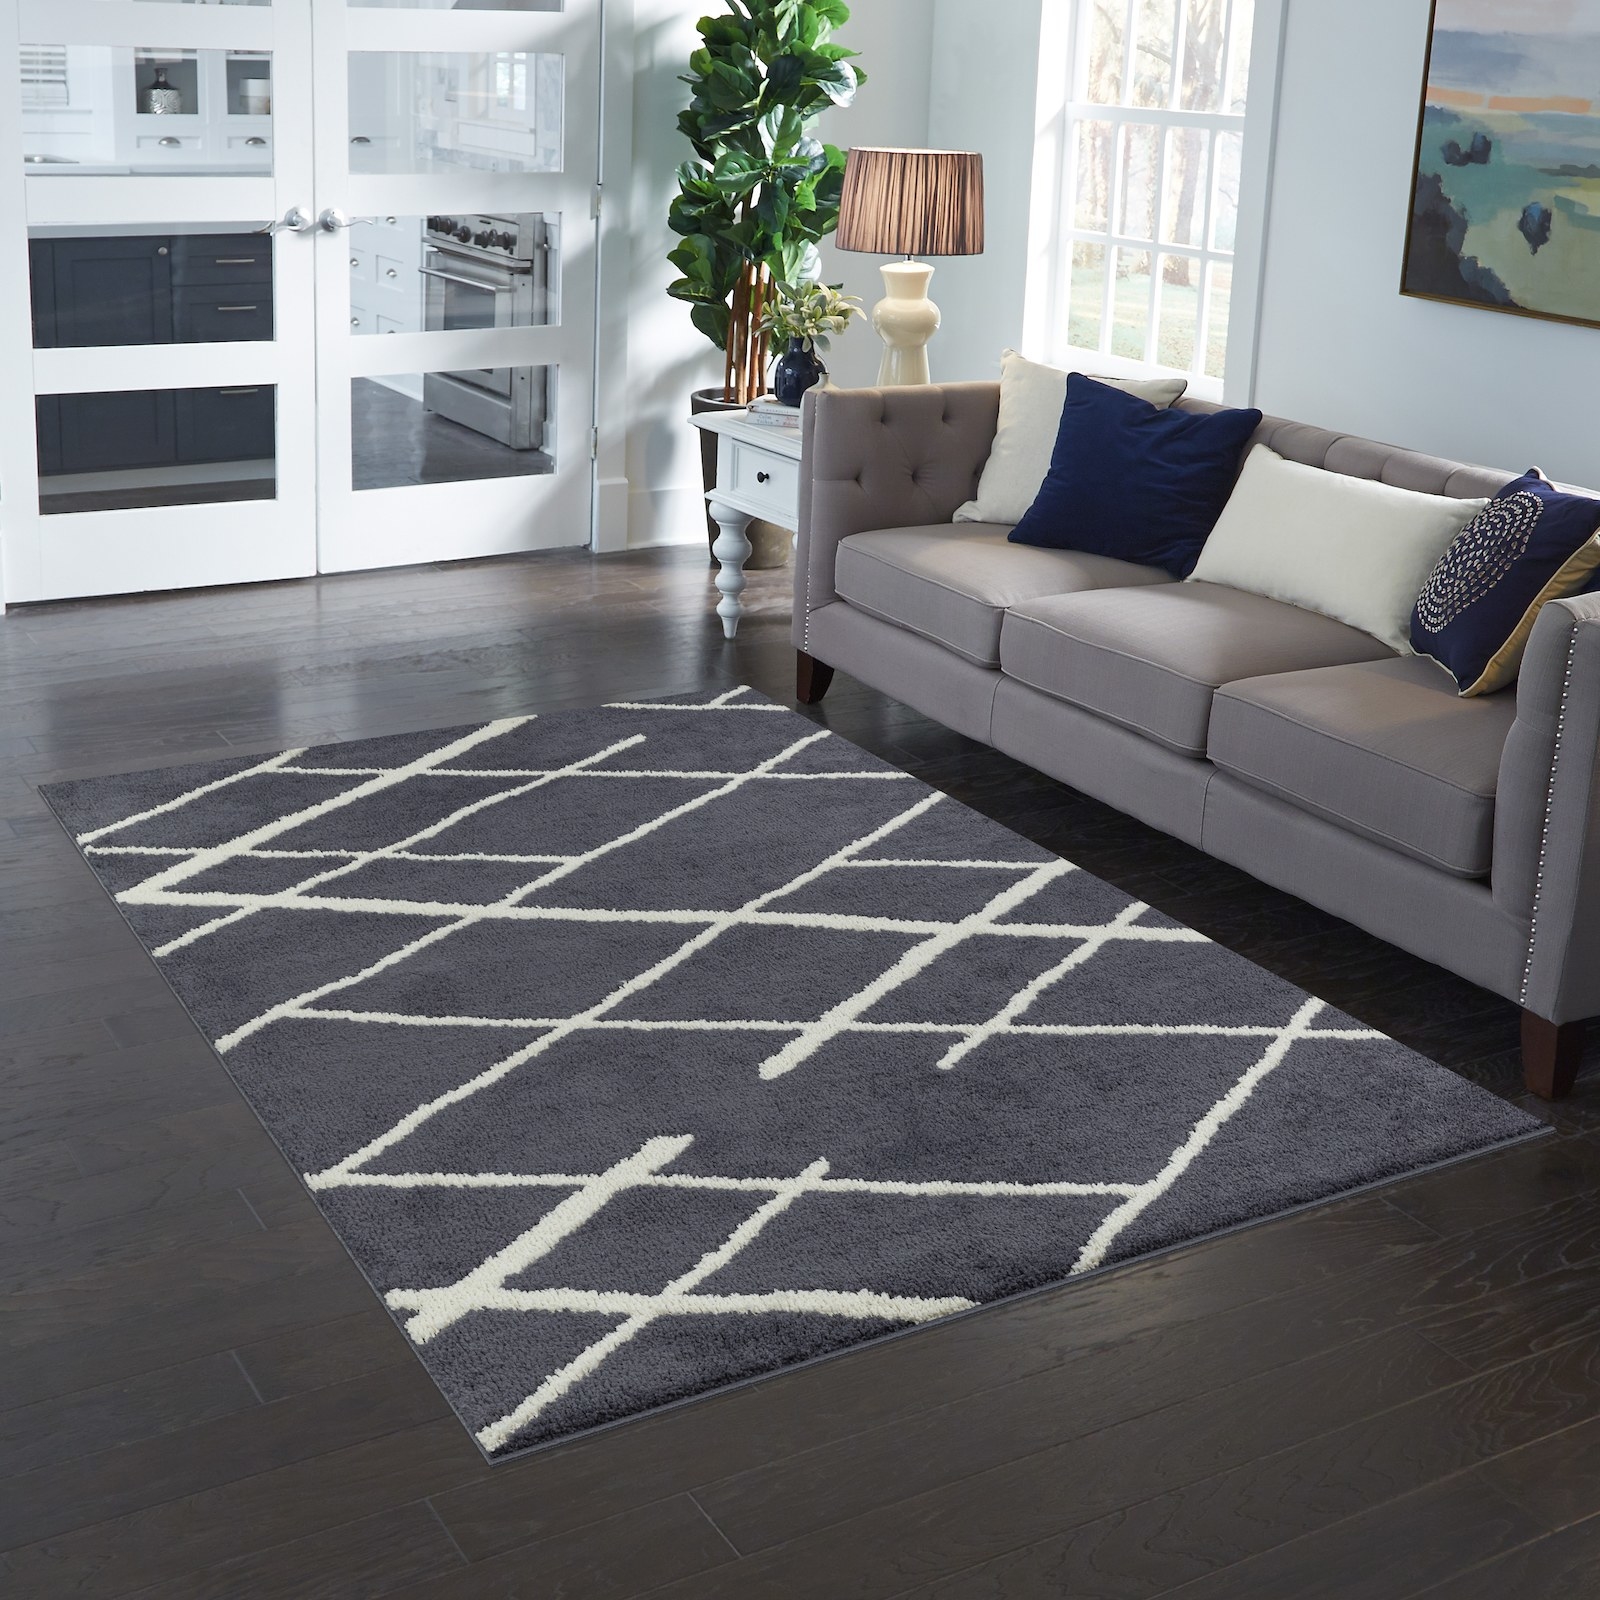 The gray and cream rug with a diamond pattern in a living room